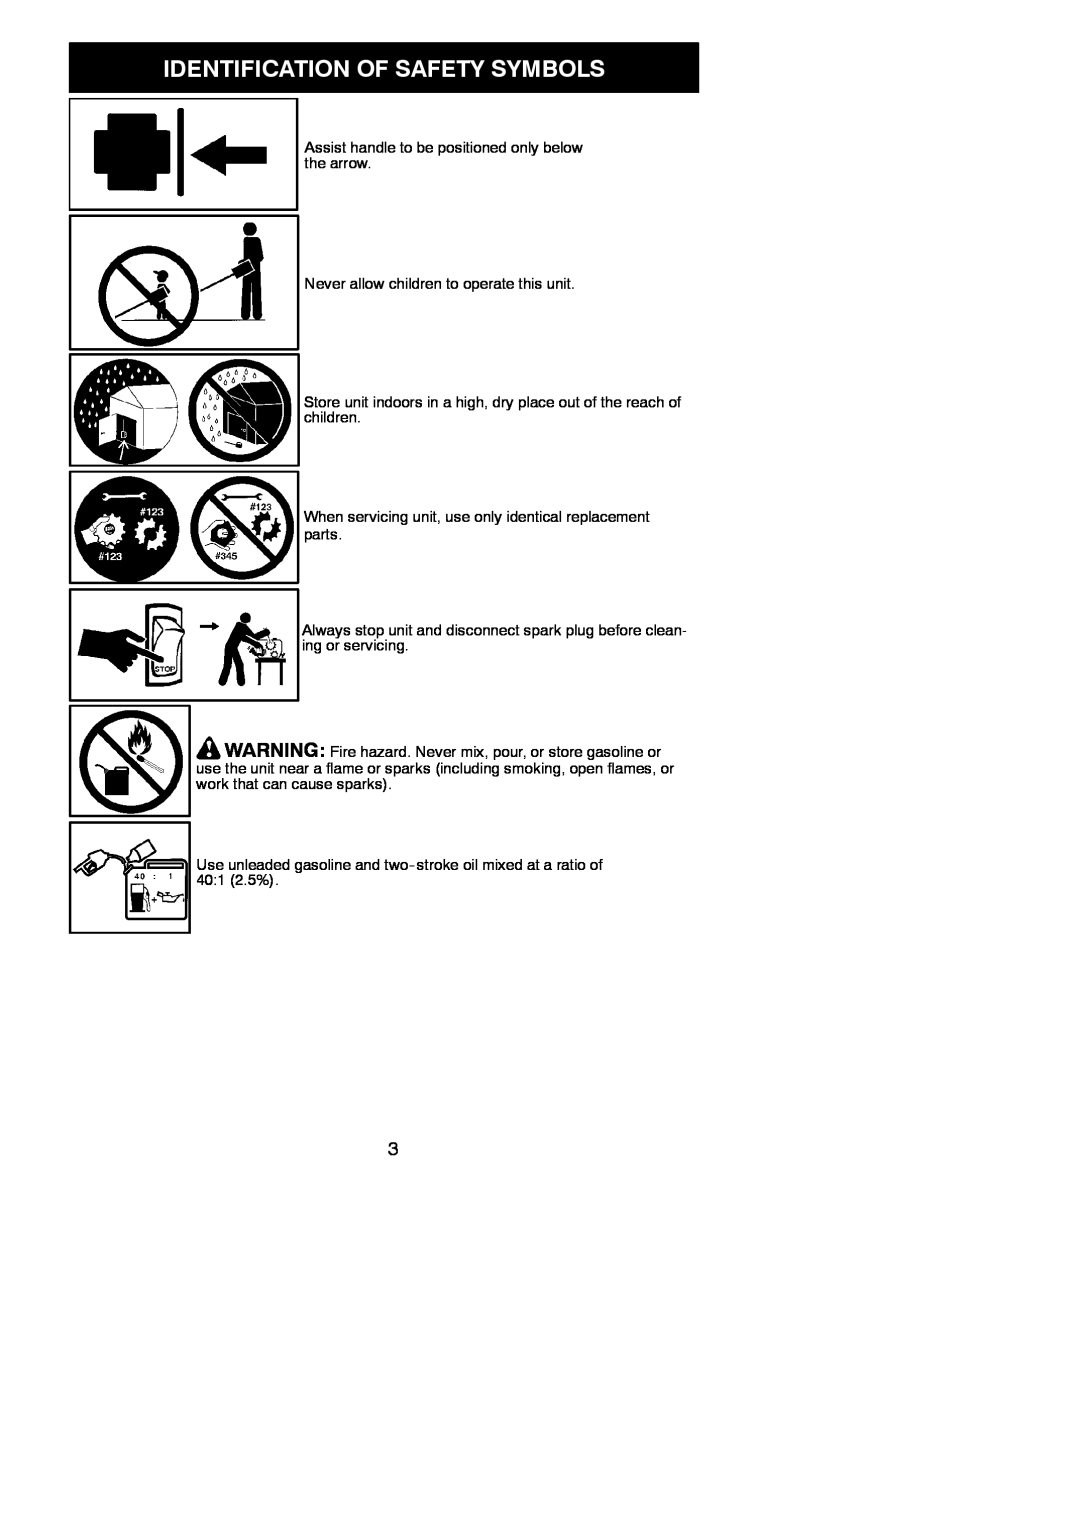 Poulan 115249426 instruction manual Identification Of Safety Symbols, Assist handle to be positioned only below the arrow 